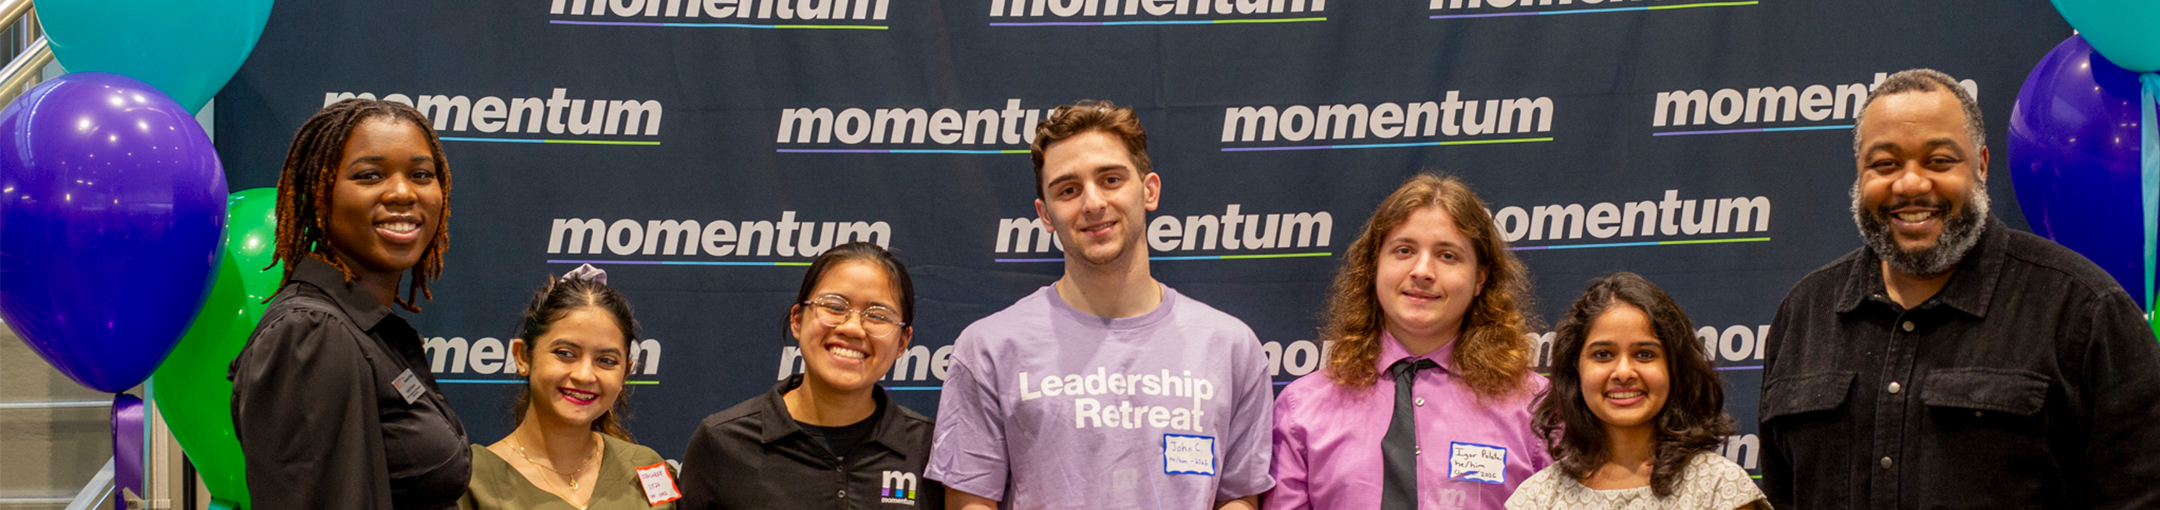 Students and staff pose for a photo in front of a Momentum backdrop